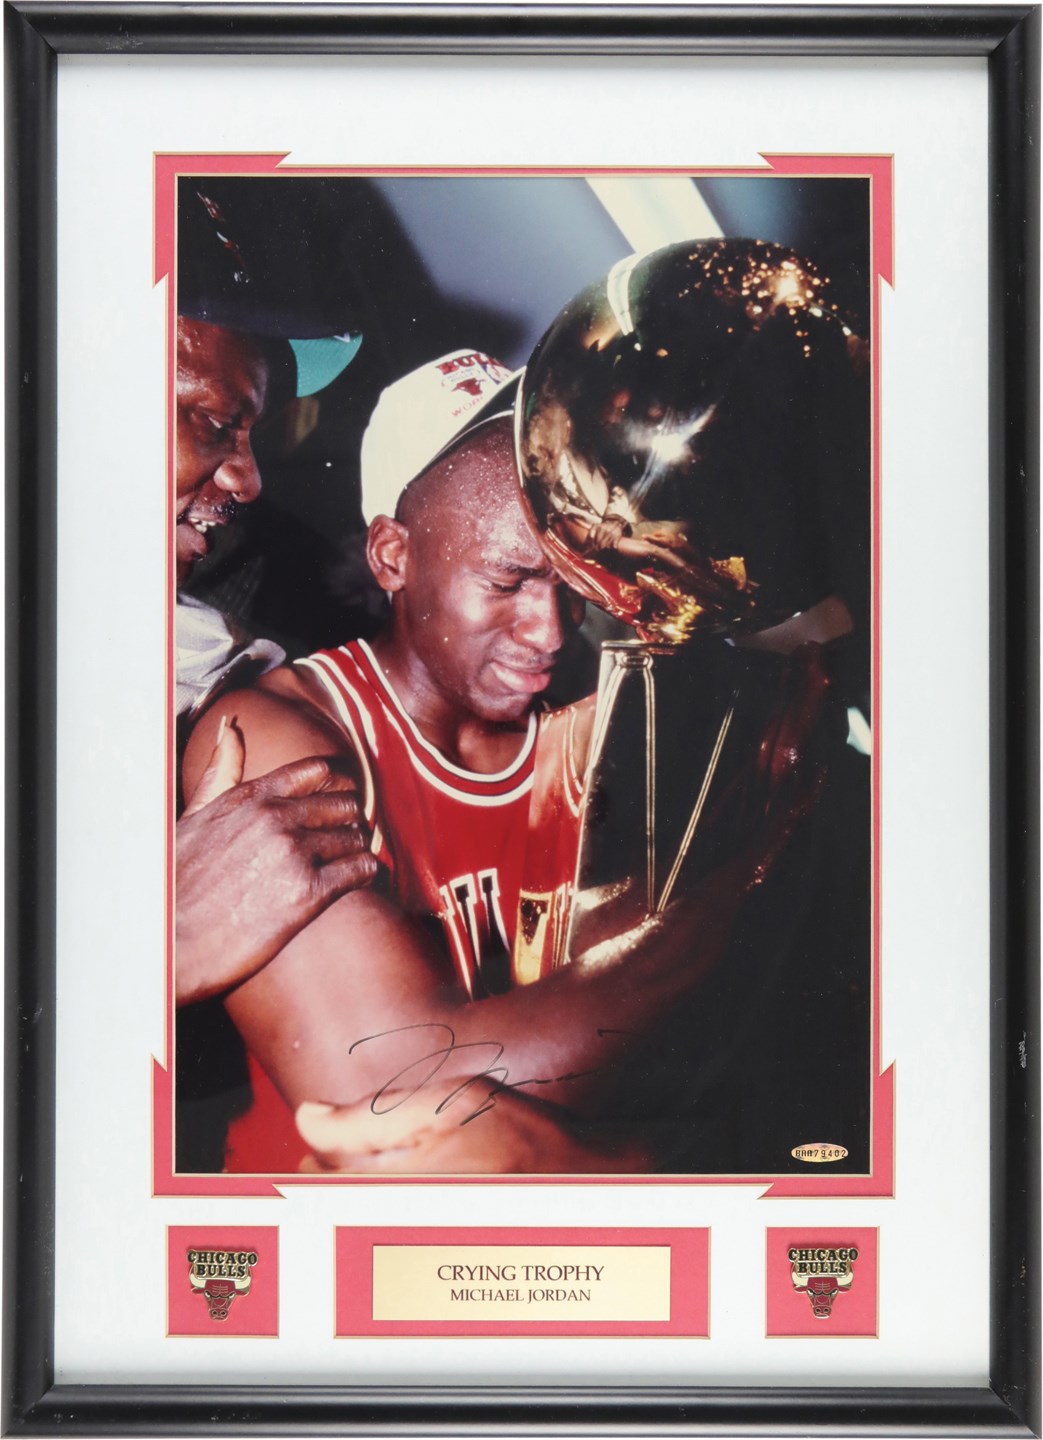 - Michael Jordan Signed 1991 NBA Finals "Crying with Trophy" Photograph (UDA)